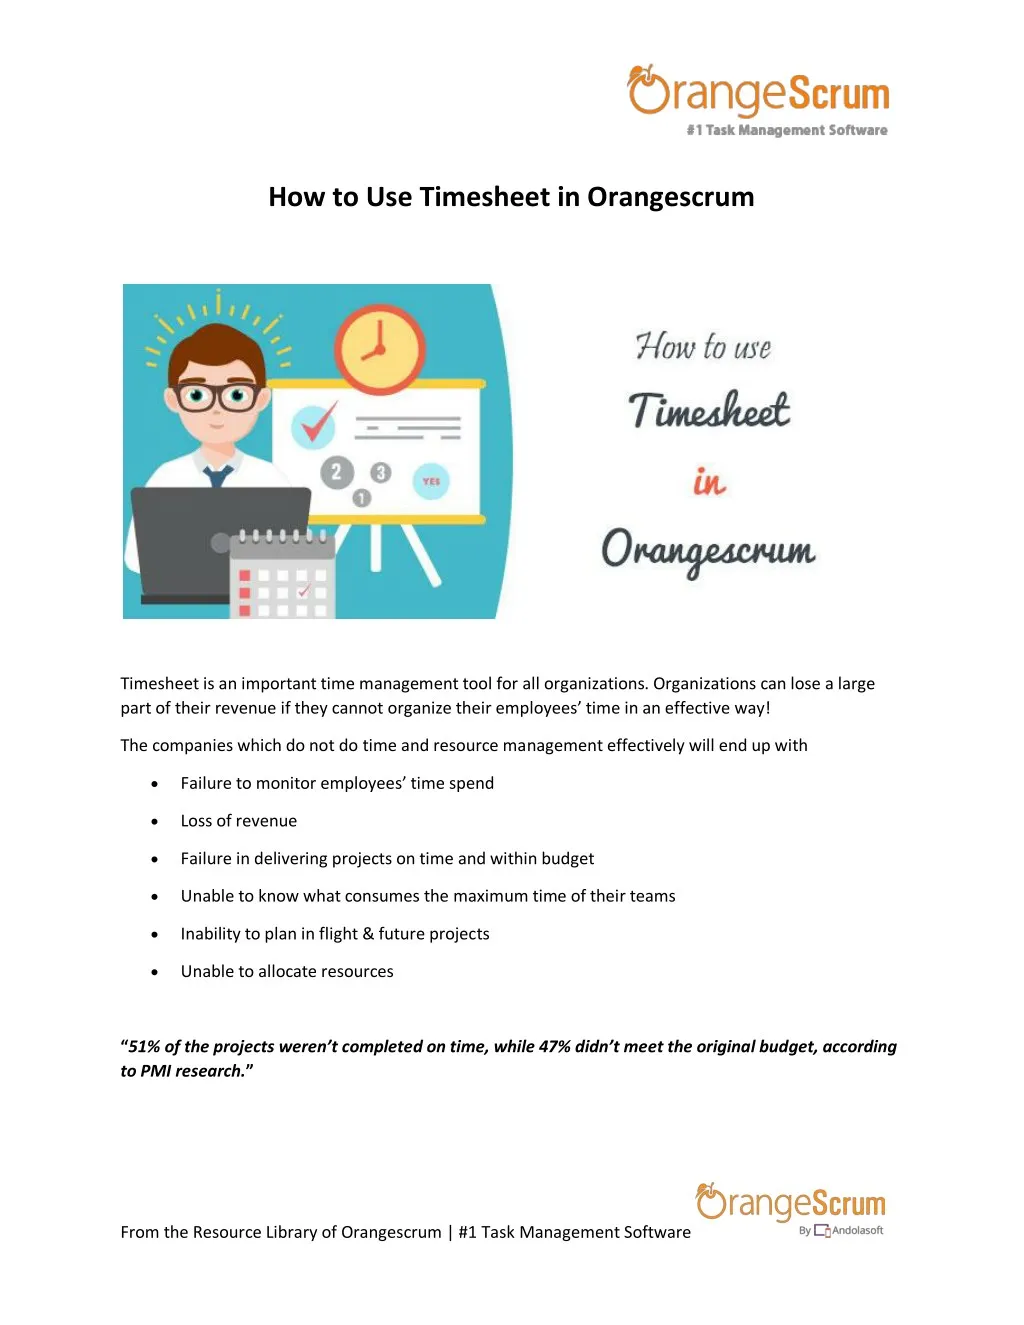 how to use timesheet in orangescrum